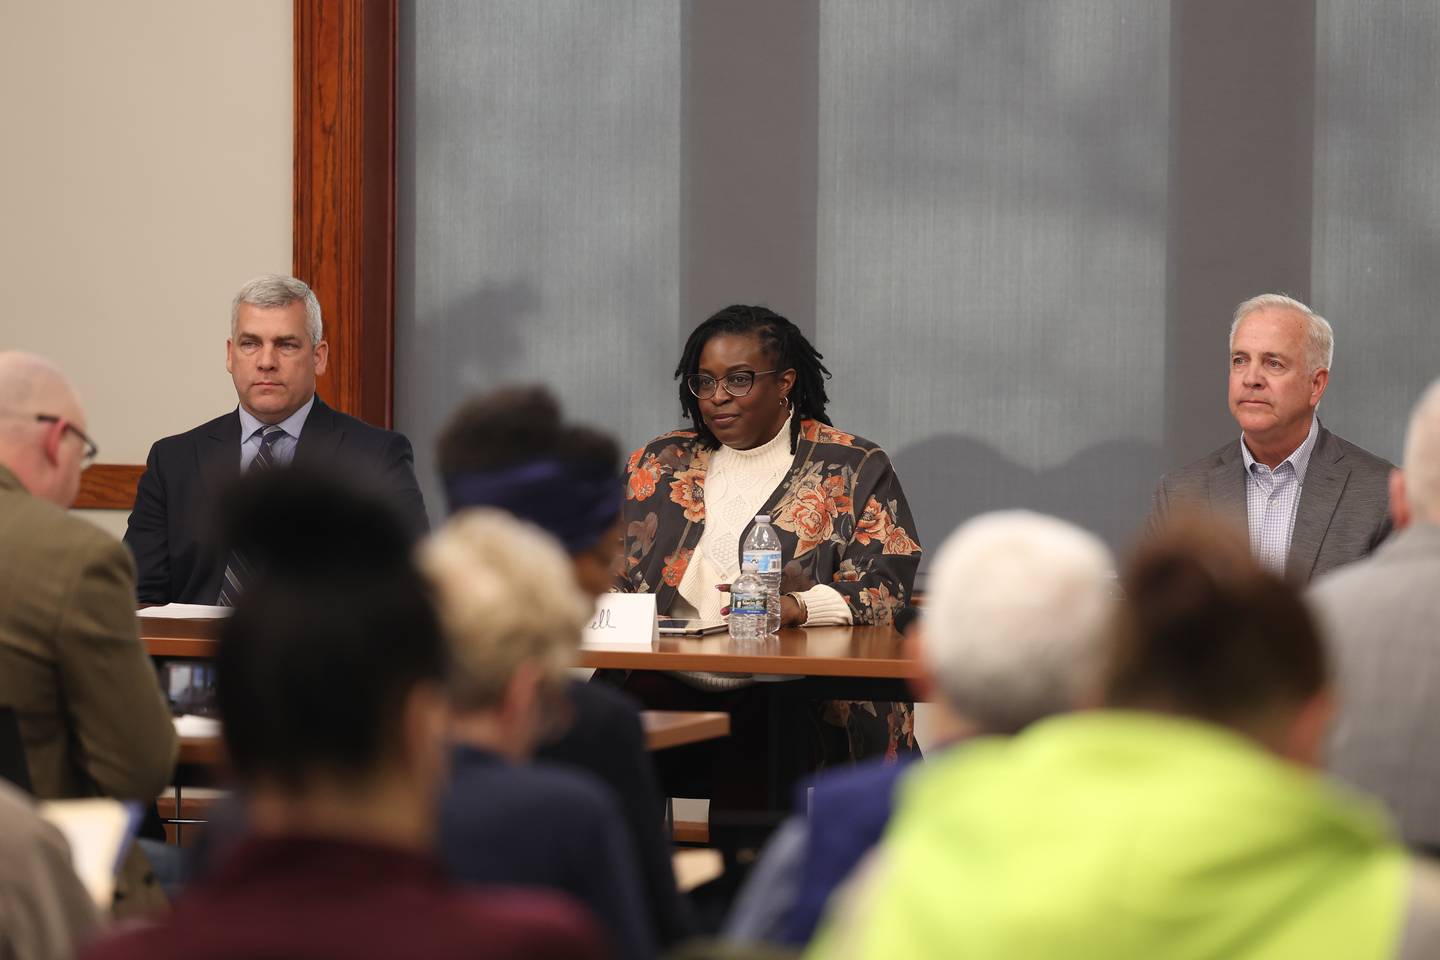 Joliet mayor Bob O’Dekirk (left), mayor candidates Tycee Bell and Terry D’Arcy attend a forum for the candidates at the Joliet Public Library on Tuesday, March 28th, 2023 in Joliet.